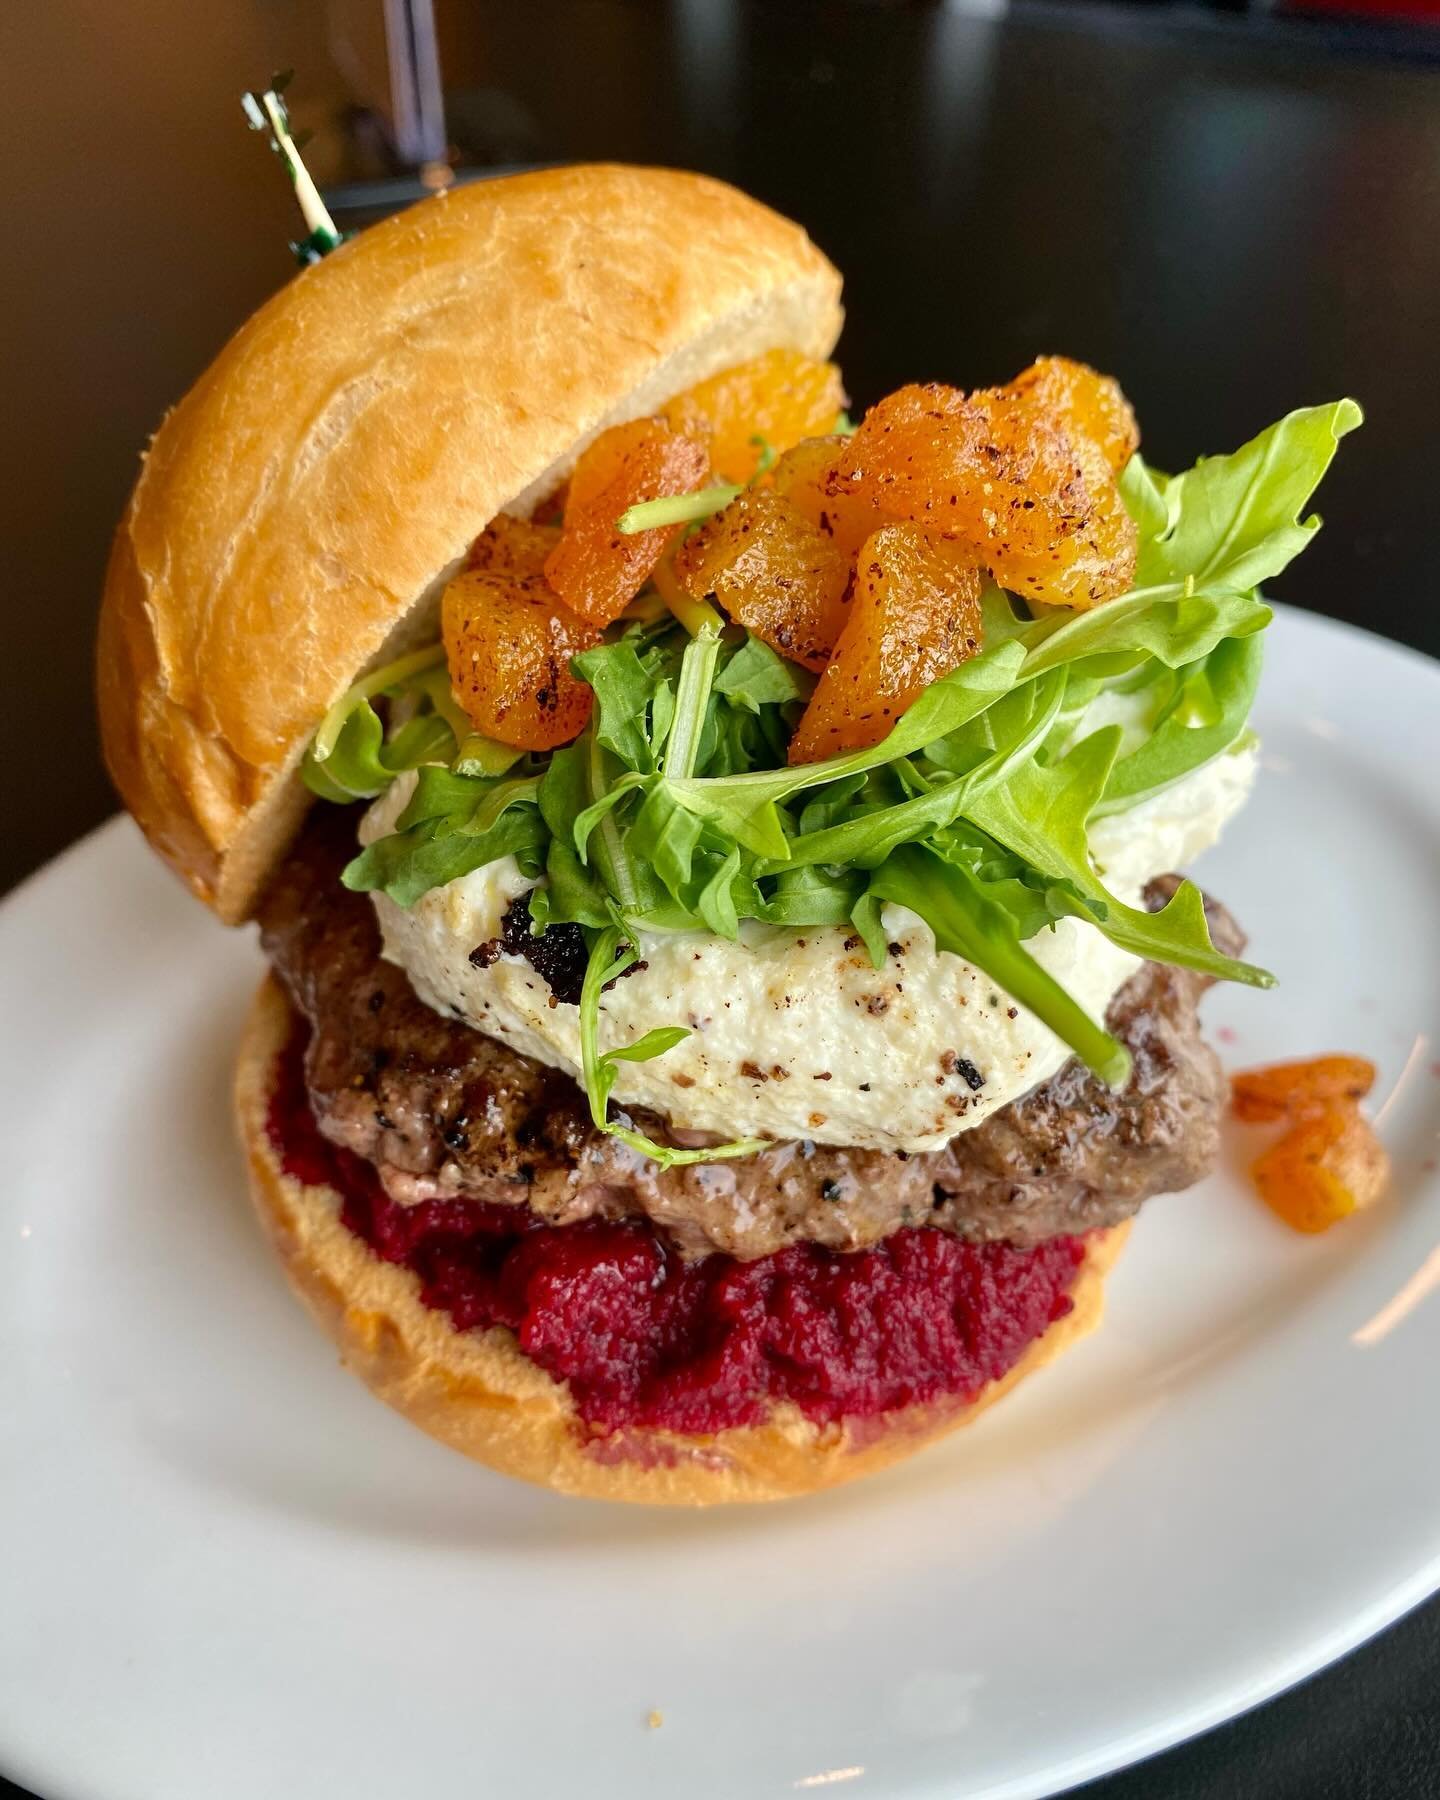 Littleton on Santa Fe Burger of The Month! The UnBEETable Spring Burger - our signature elk-beef blend party on toasted brioche with roasted beet pur&eacute;e, lemony ricotta, arugula, &amp; candied-spiced apricots! 
Only available at our Littleton l